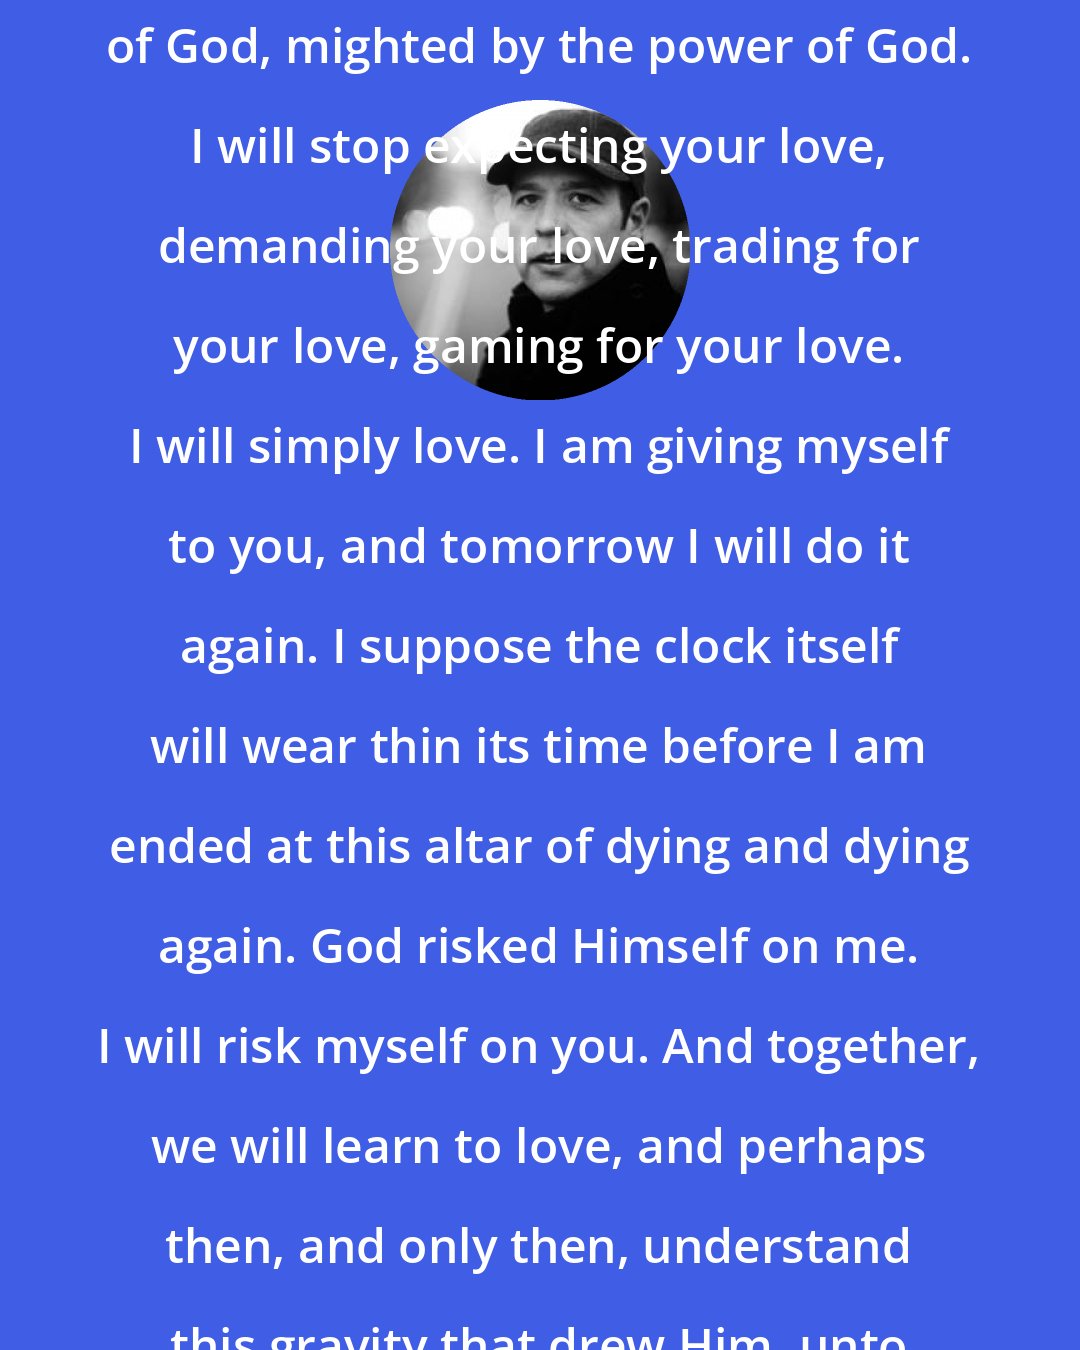 Donald Miller: I will love you like God, because of God, mighted by the power of God. I will stop expecting your love, demanding your love, trading for your love, gaming for your love. I will simply love. I am giving myself to you, and tomorrow I will do it again. I suppose the clock itself will wear thin its time before I am ended at this altar of dying and dying again. God risked Himself on me. I will risk myself on you. And together, we will learn to love, and perhaps then, and only then, understand this gravity that drew Him, unto us.